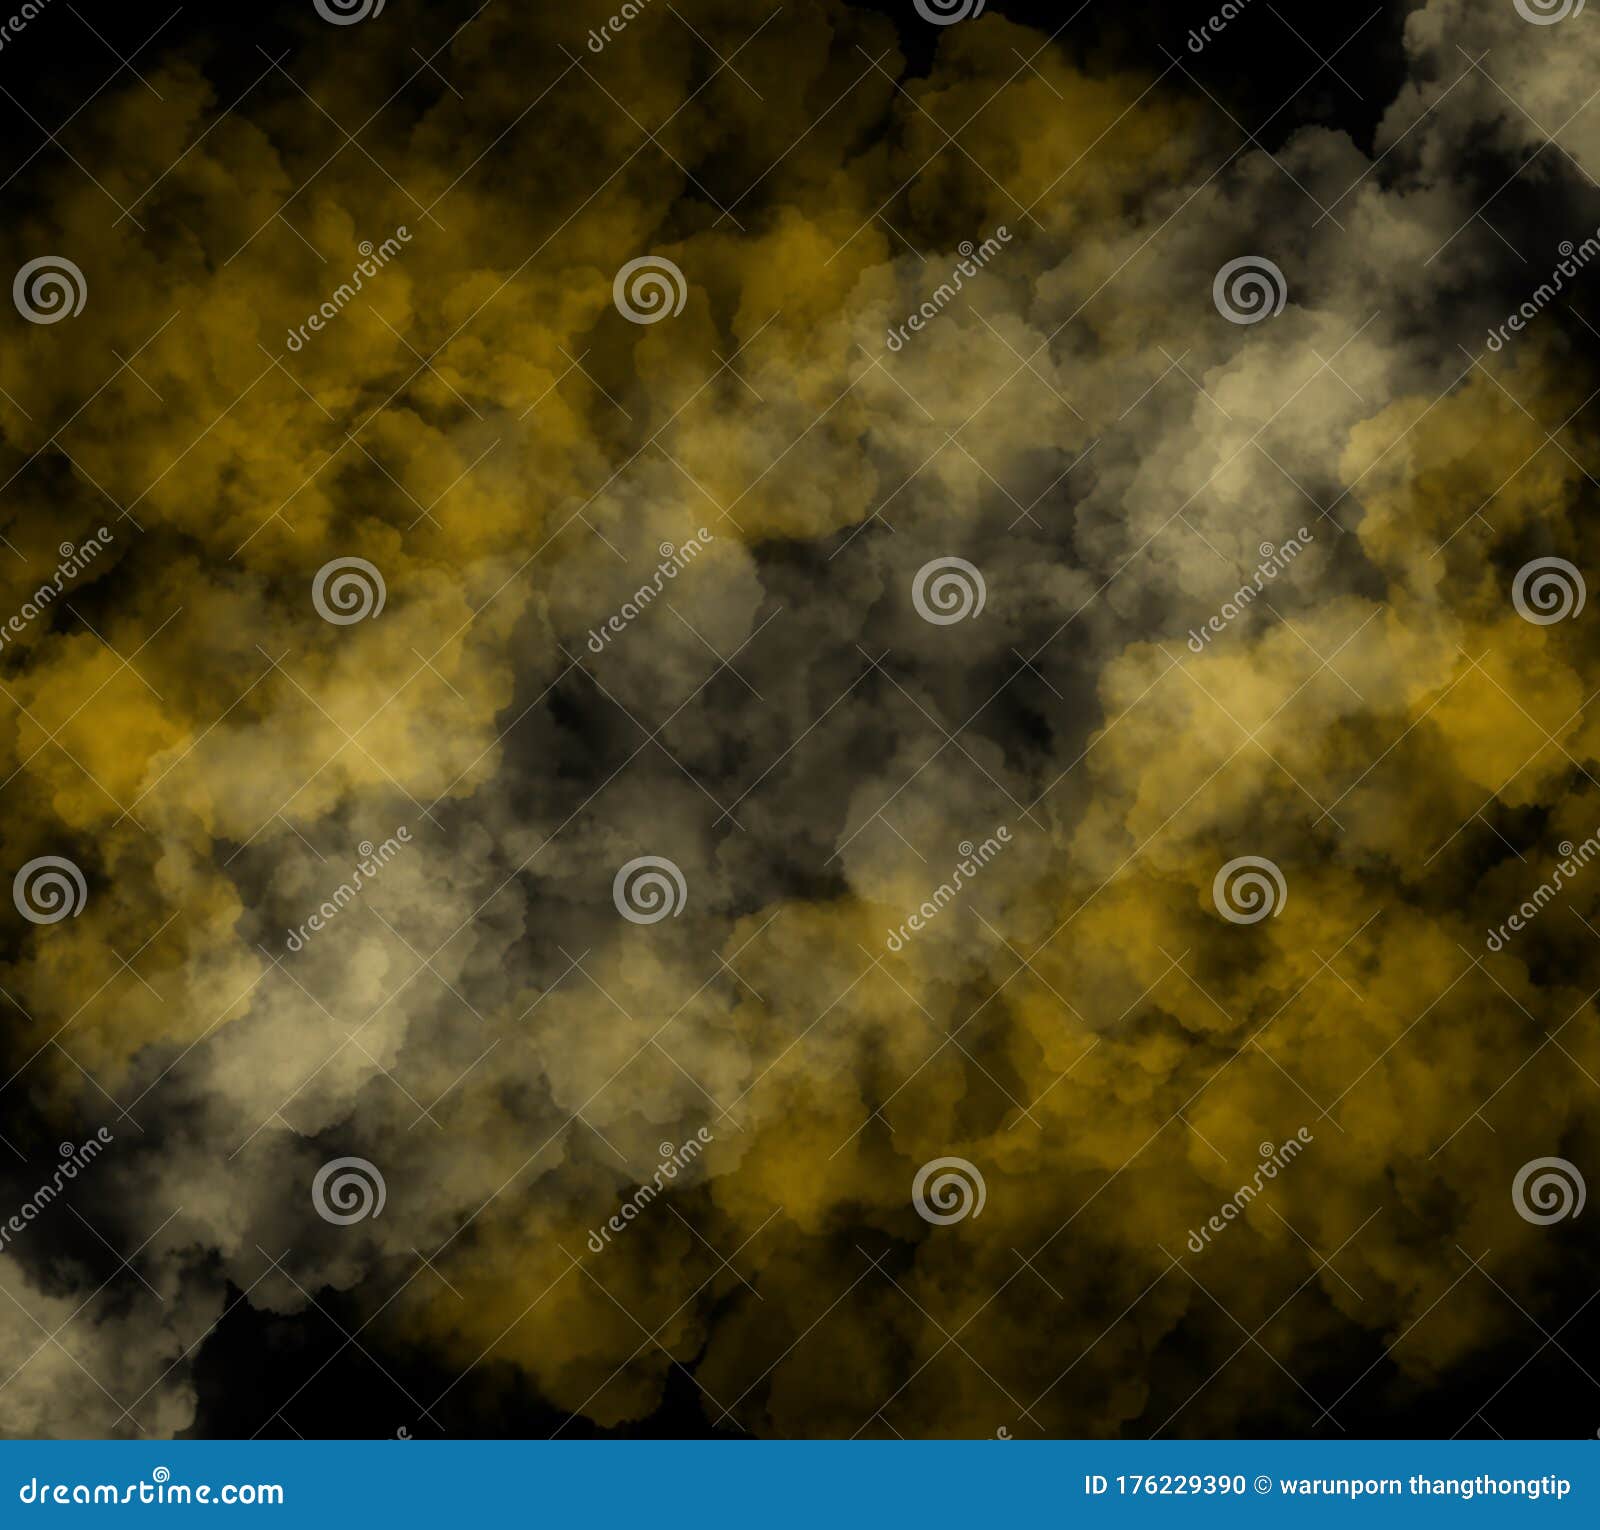 Digital Illustration Golden Smoke Isolated Transparent Special Effect.  Yellow Vector Cloudiness, Mist or Smog Background Stock Illustration -  Illustration of background, design: 176229390